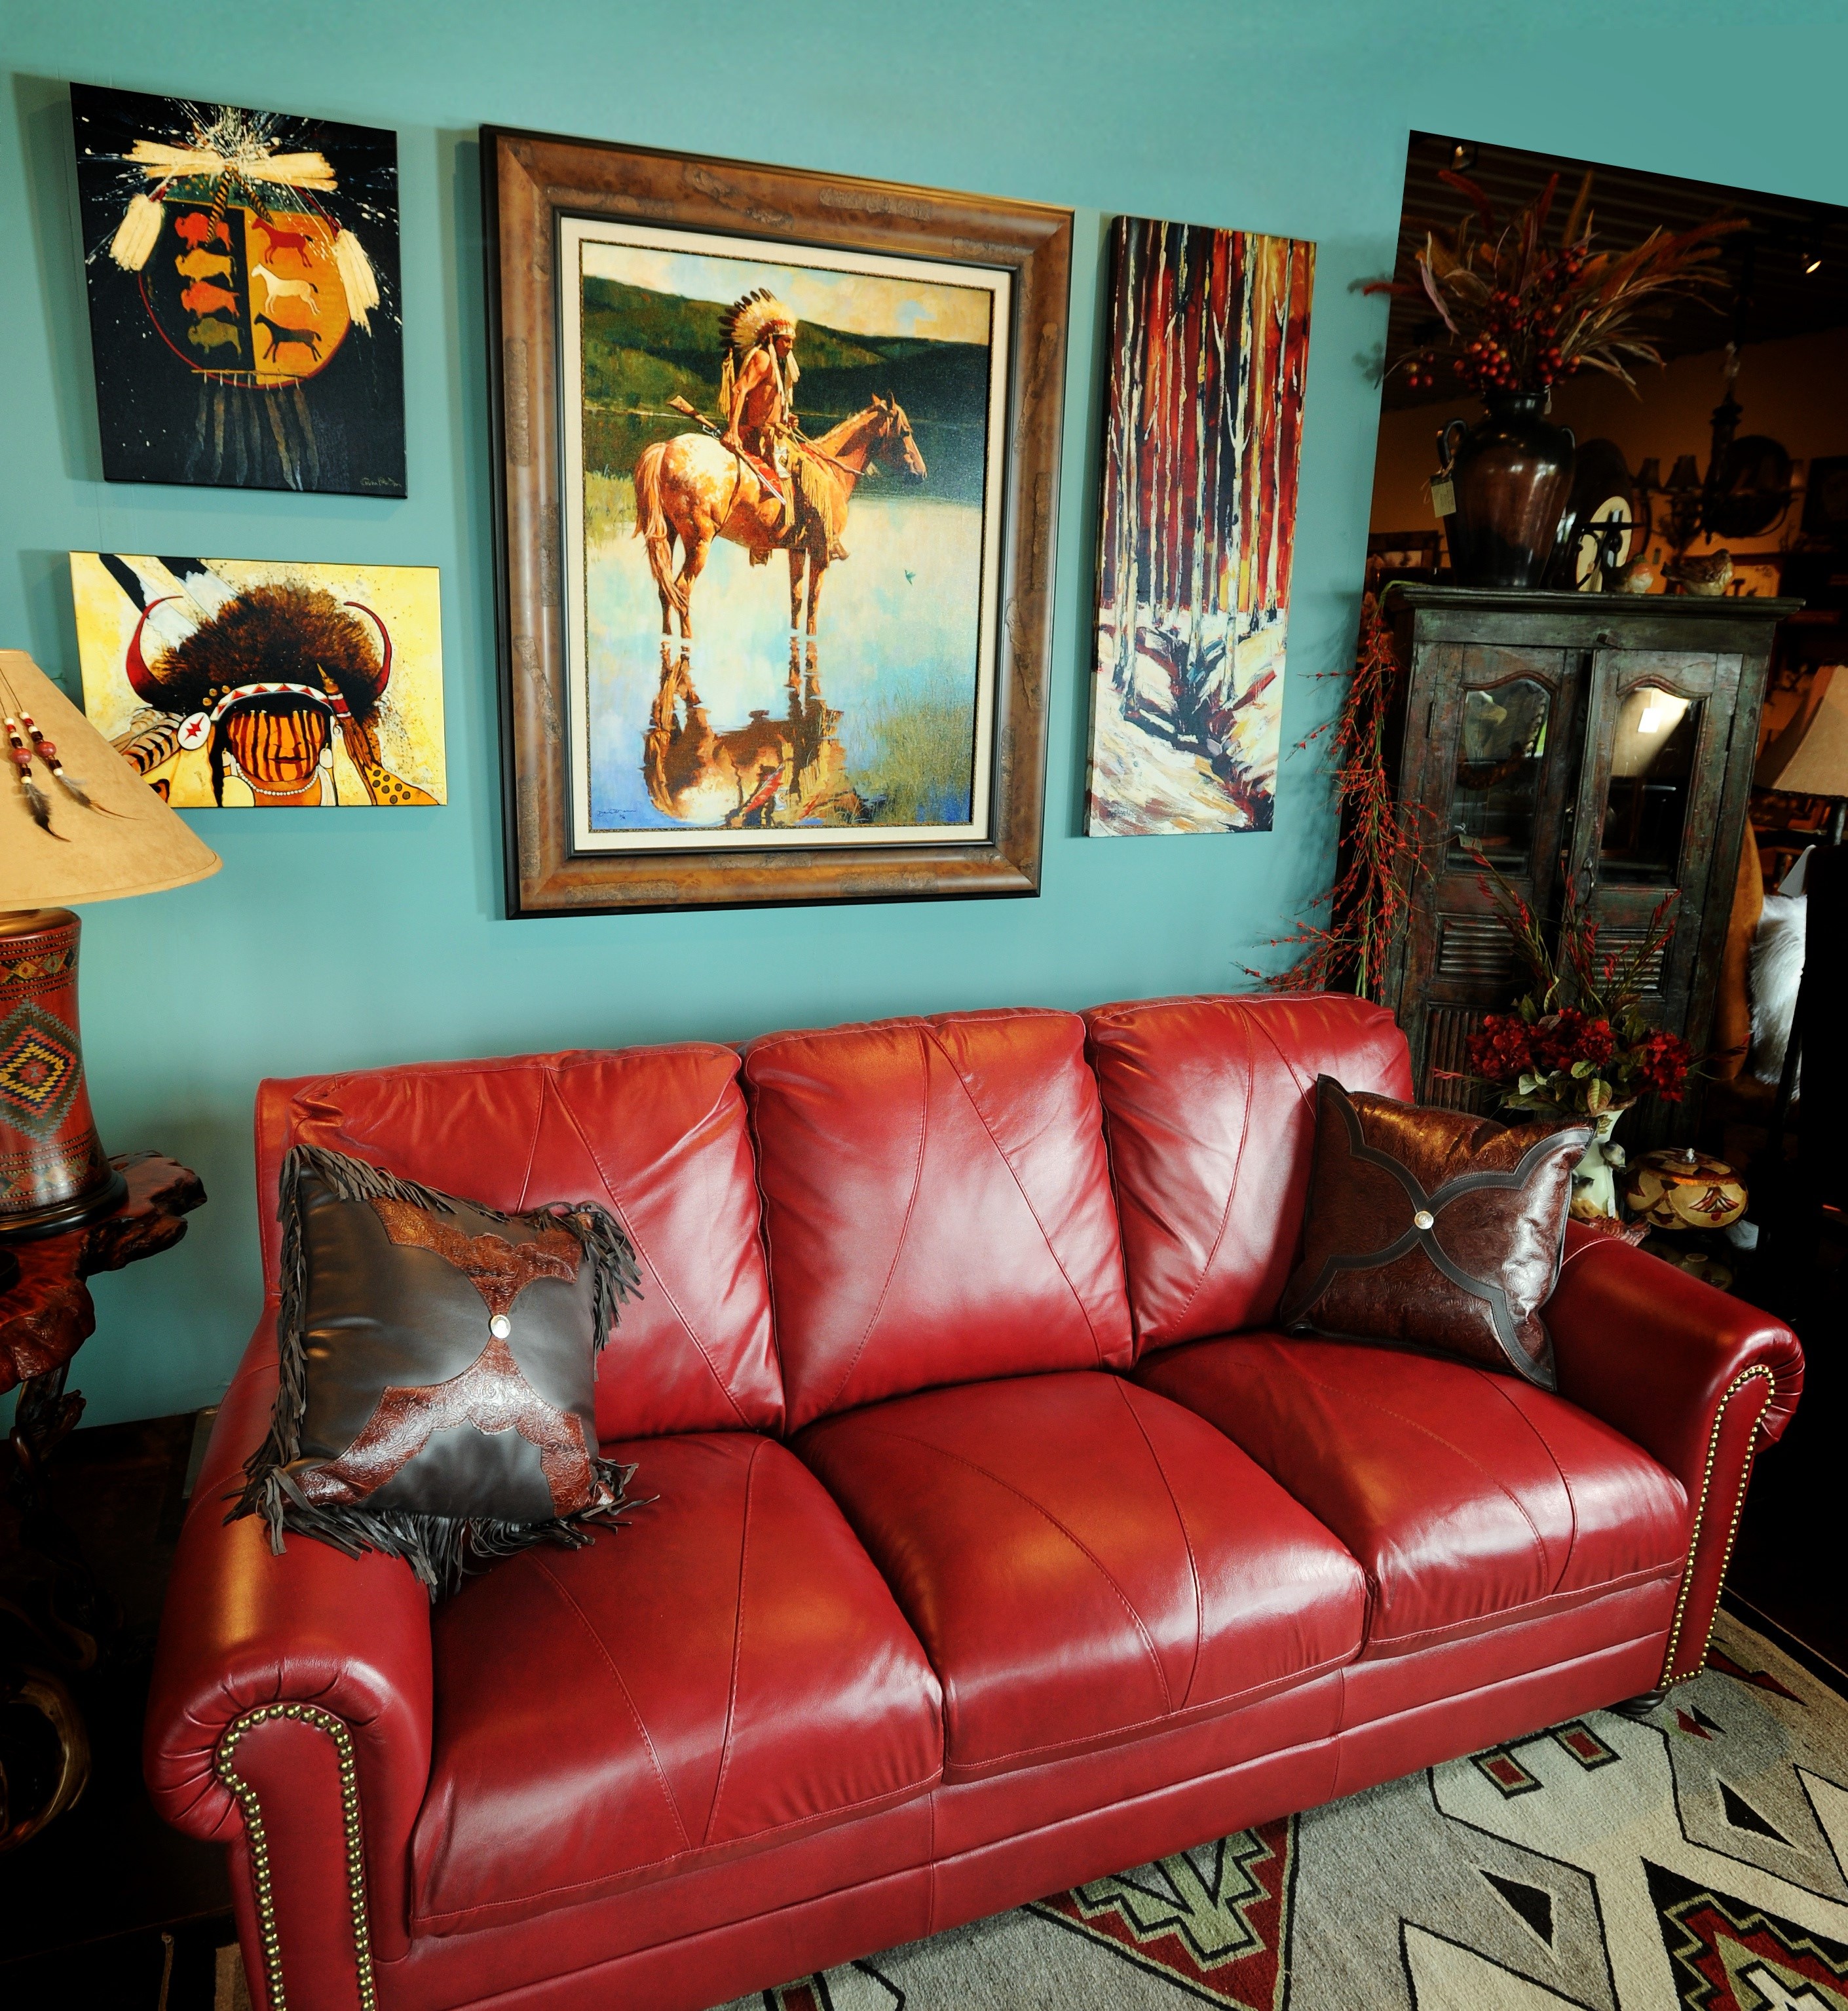 Classic Living With Fascinating Classic Living Room Design With Red Leather Sofa Blue Mint Concrete Wall And Several Indian Ornaments Filled The Room Furniture Outstanding Living Room Furnished With A Red Leather Couch Or Sofa Sets